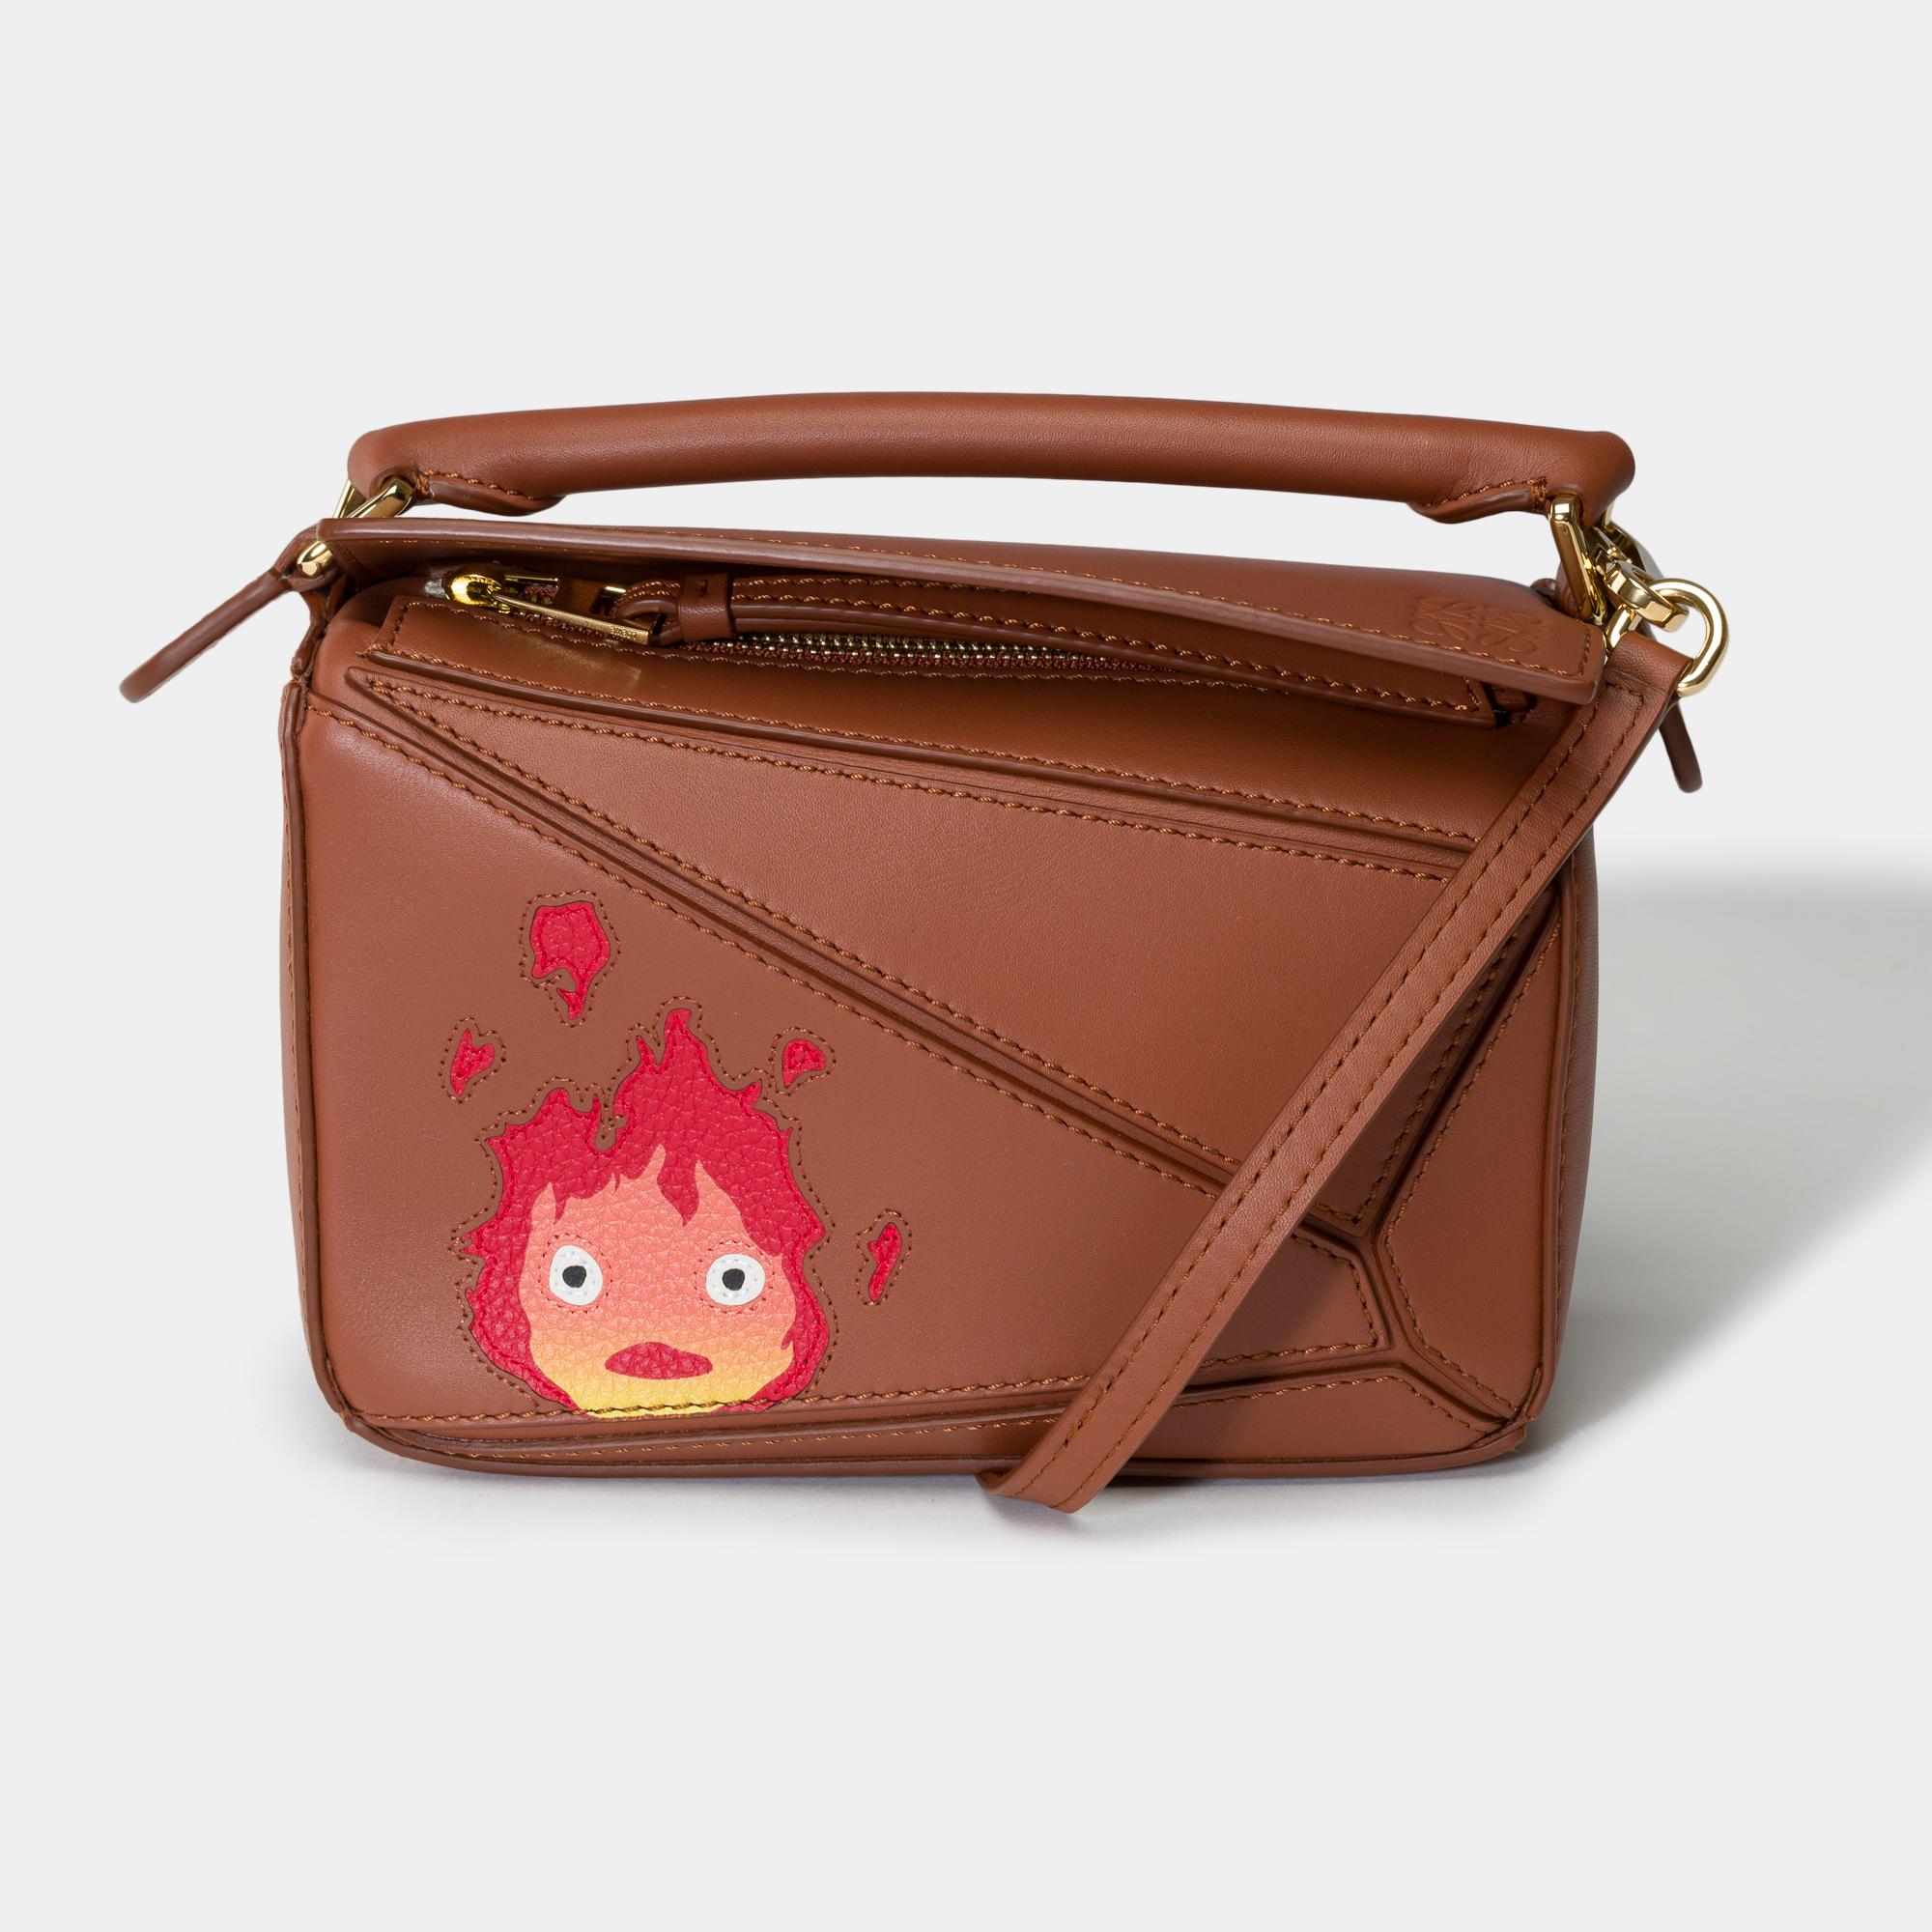 Loewe​ ​Puzzle​ ​Small​ ​bag​ ​limited​ ​edition​ ​in​ ​collaboration​ ​with​ ​Studio​ ​Ghibli​ ​in​ ​caramel​ ​calfskin​ ​with​ ​Calcifer​ ​color​ ​design,​ ​gold​ ​metal​ ​trim,​ ​short​ ​handle​ ​and​ ​removable​ ​adjustable​ ​shoulder​ ​strap​